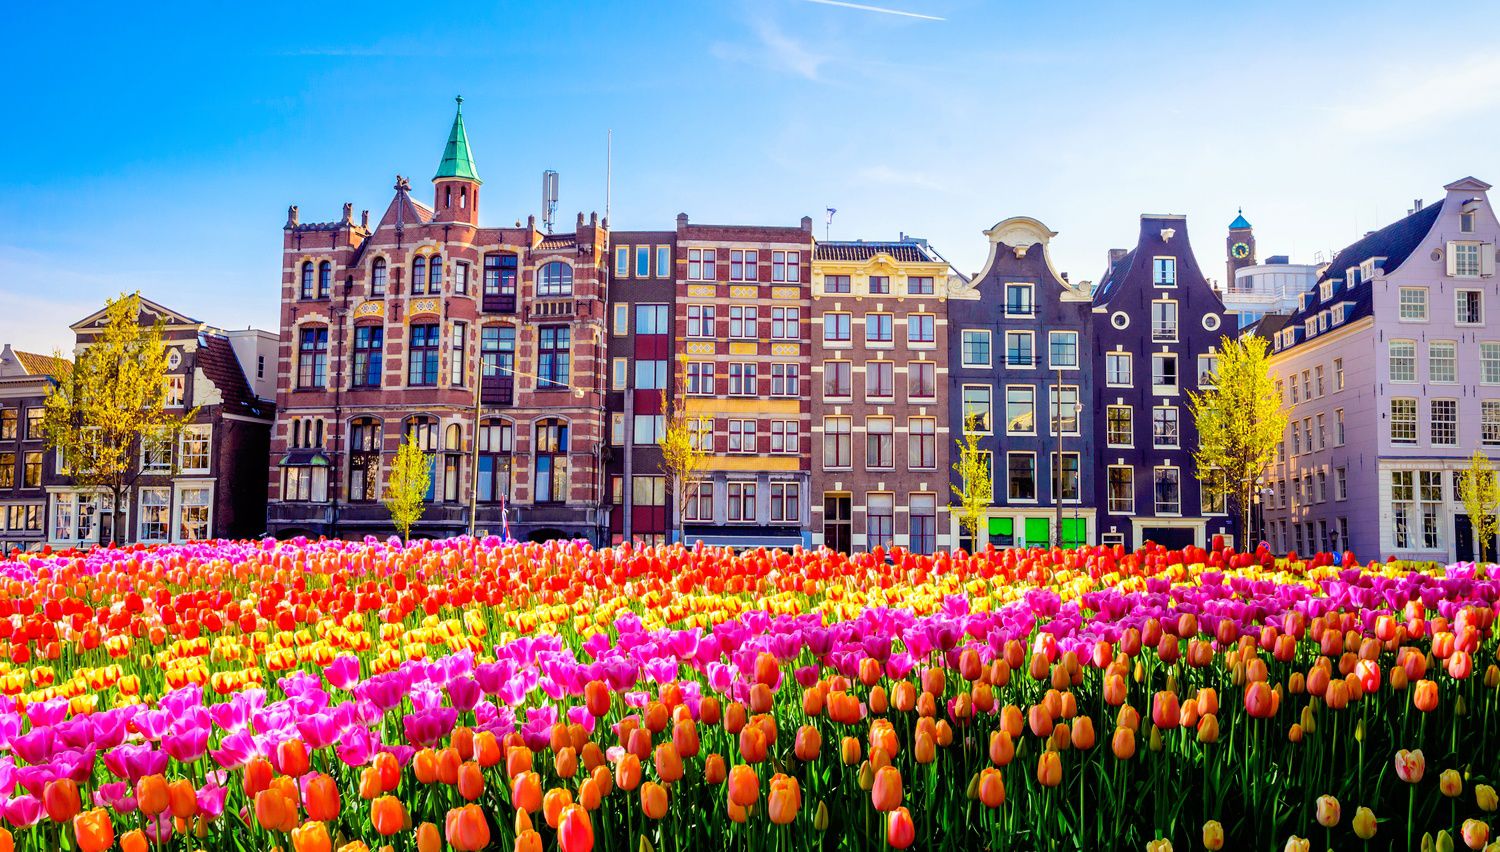 🗽 What Famous Landmark Should You Visit Next Based on Your A-Z Travel Bucket List? Netherlands